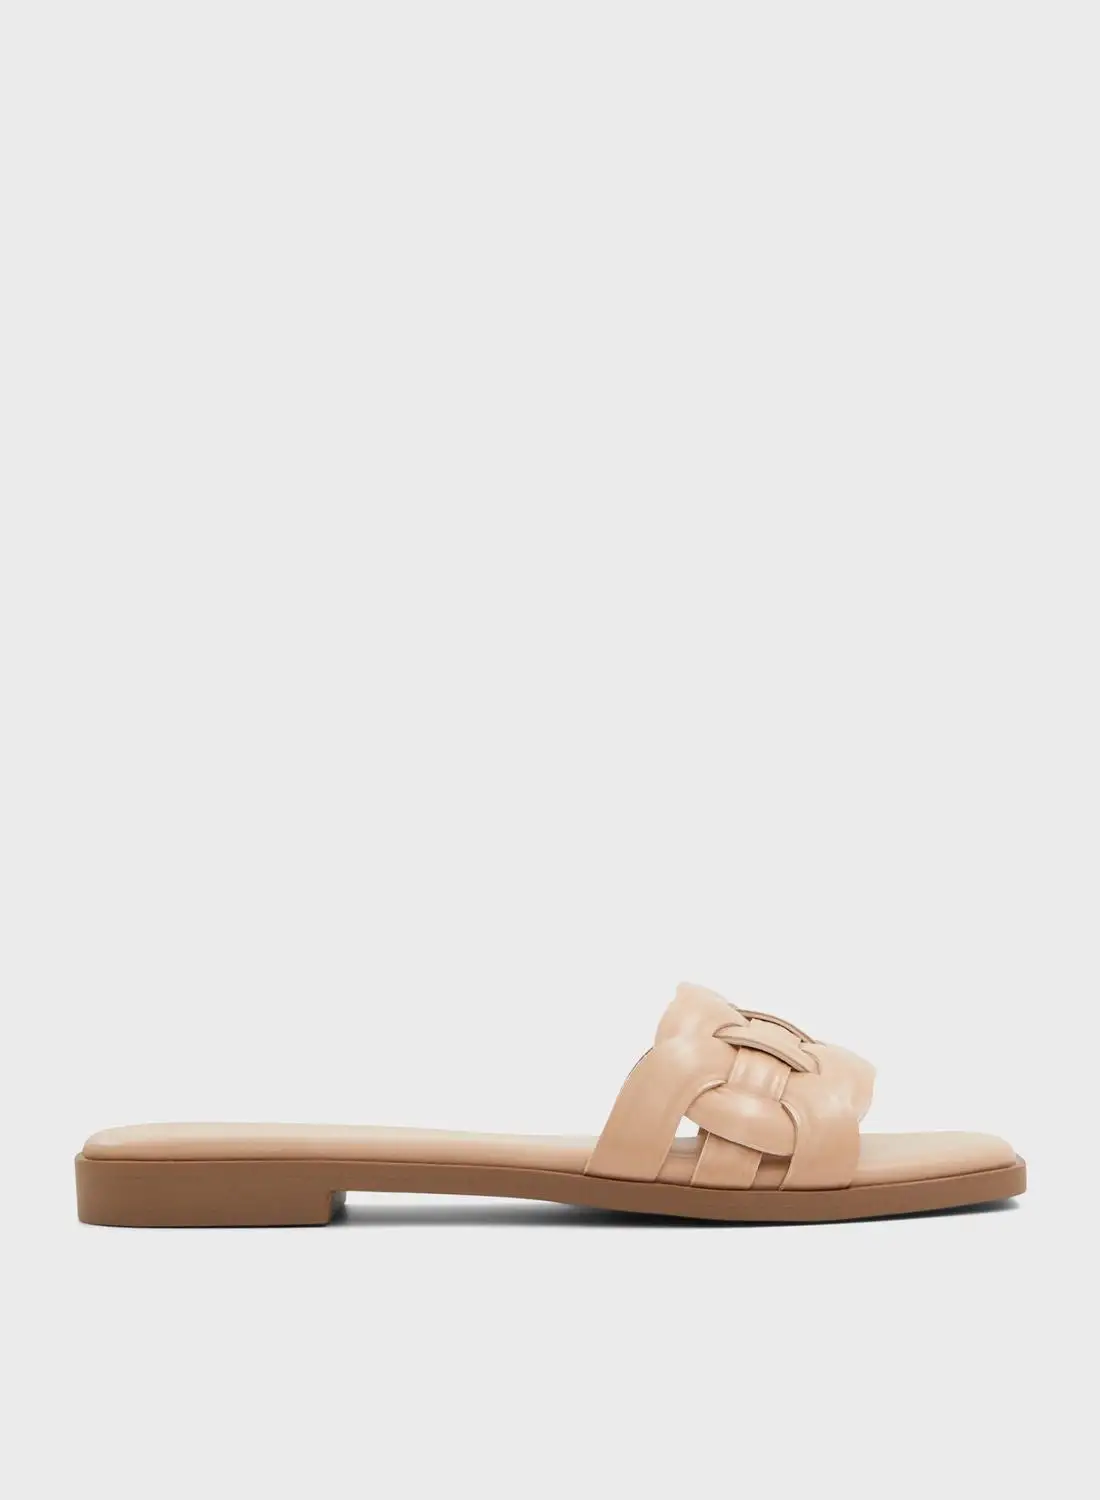 CALL IT SPRING Melina Flat Sandals